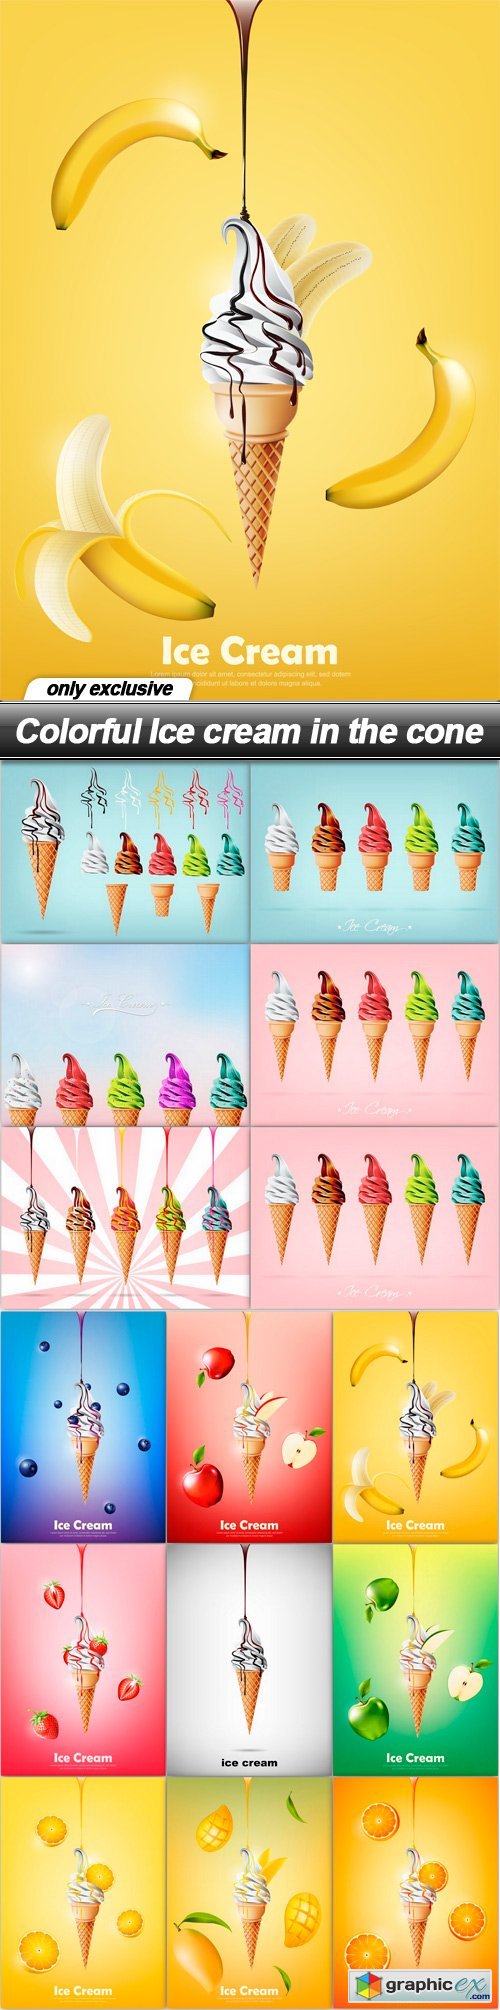 Colorful Ice cream in the cone - 15 EPS